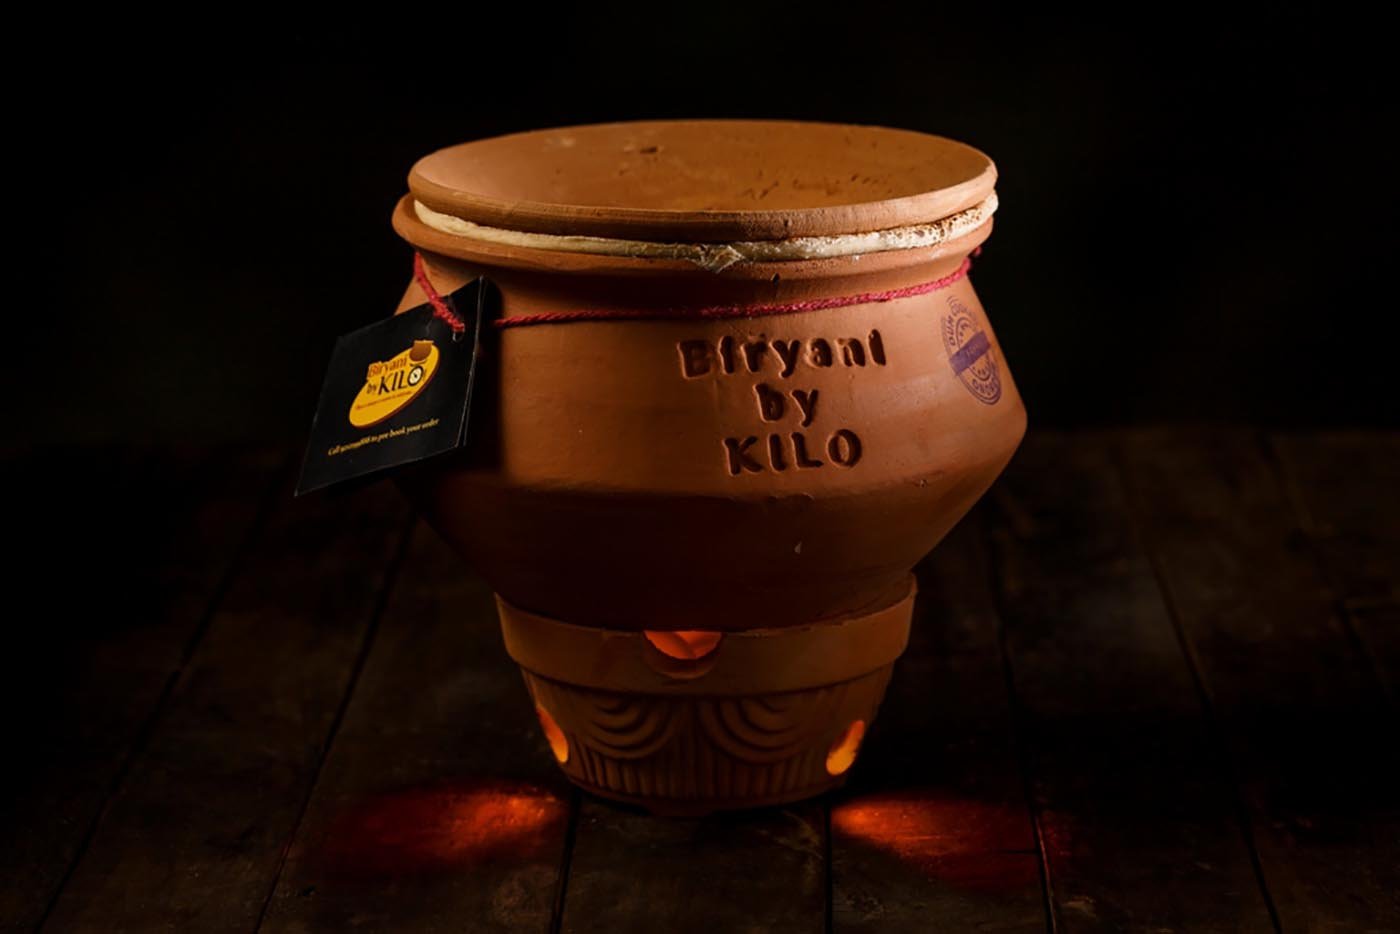 Get Your Biryani Served In The Handi It is Cooked In, Lifeinchd